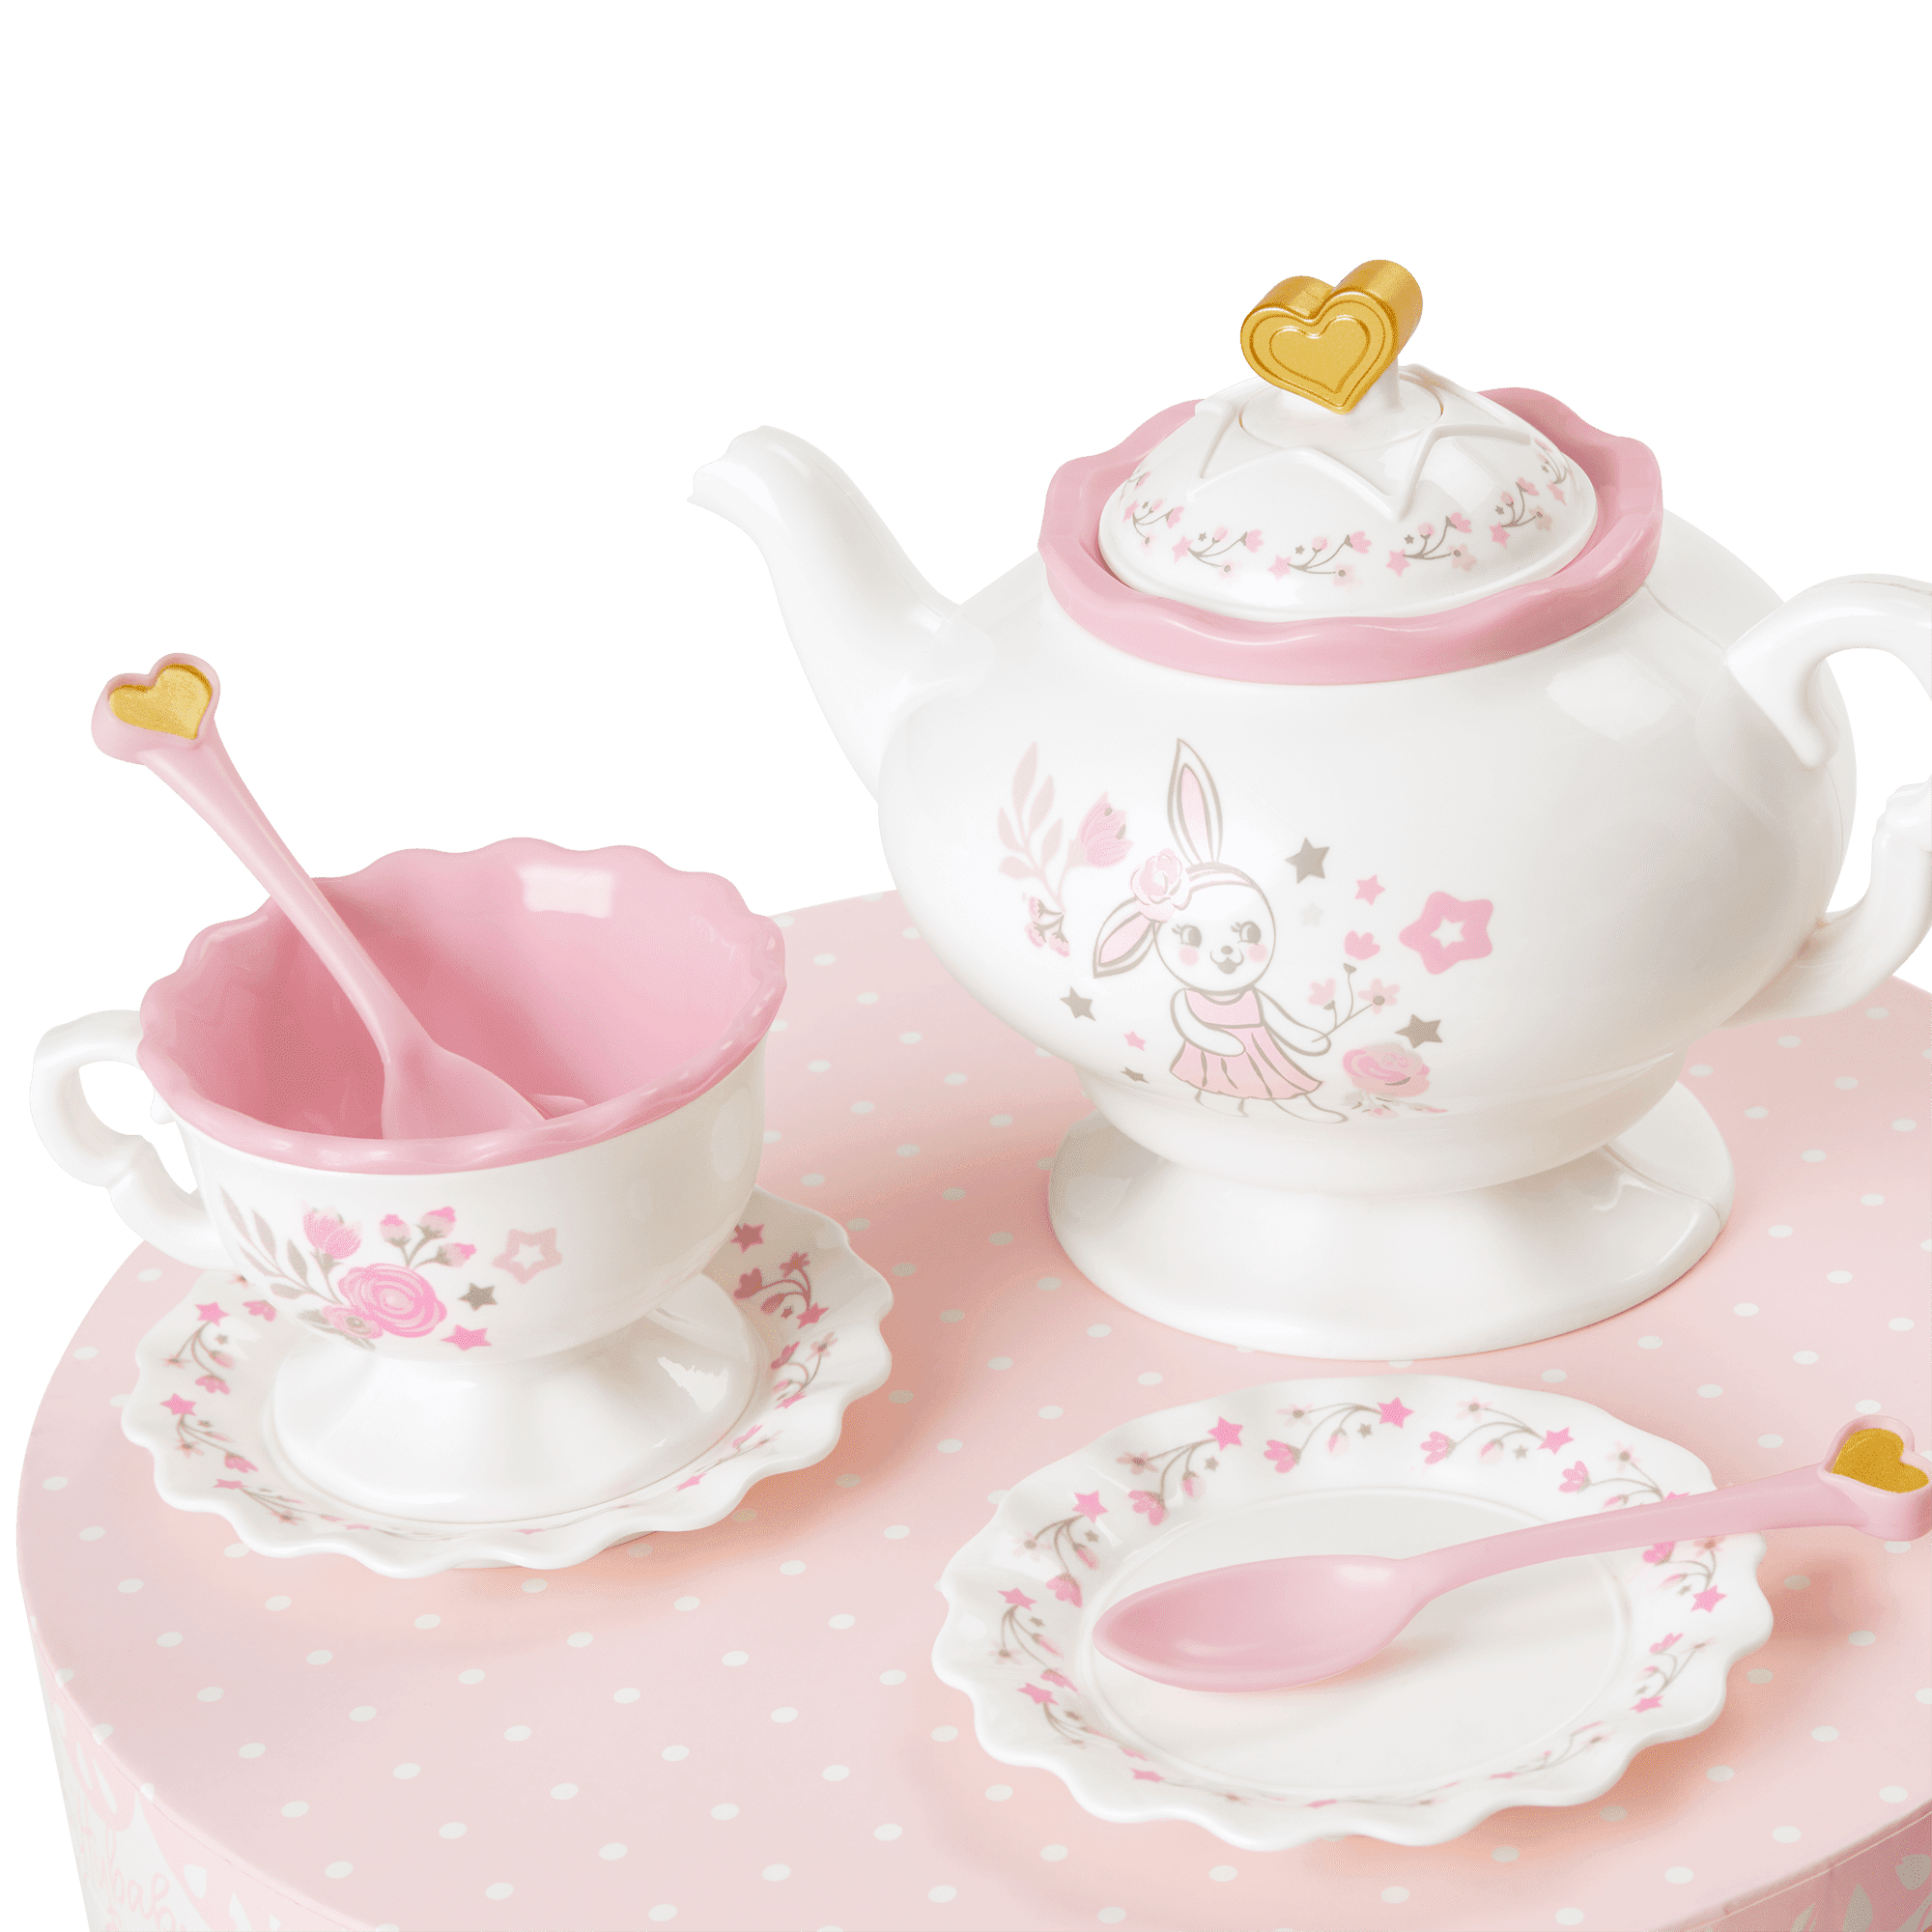 American Girl® Tea Party Set for Girls